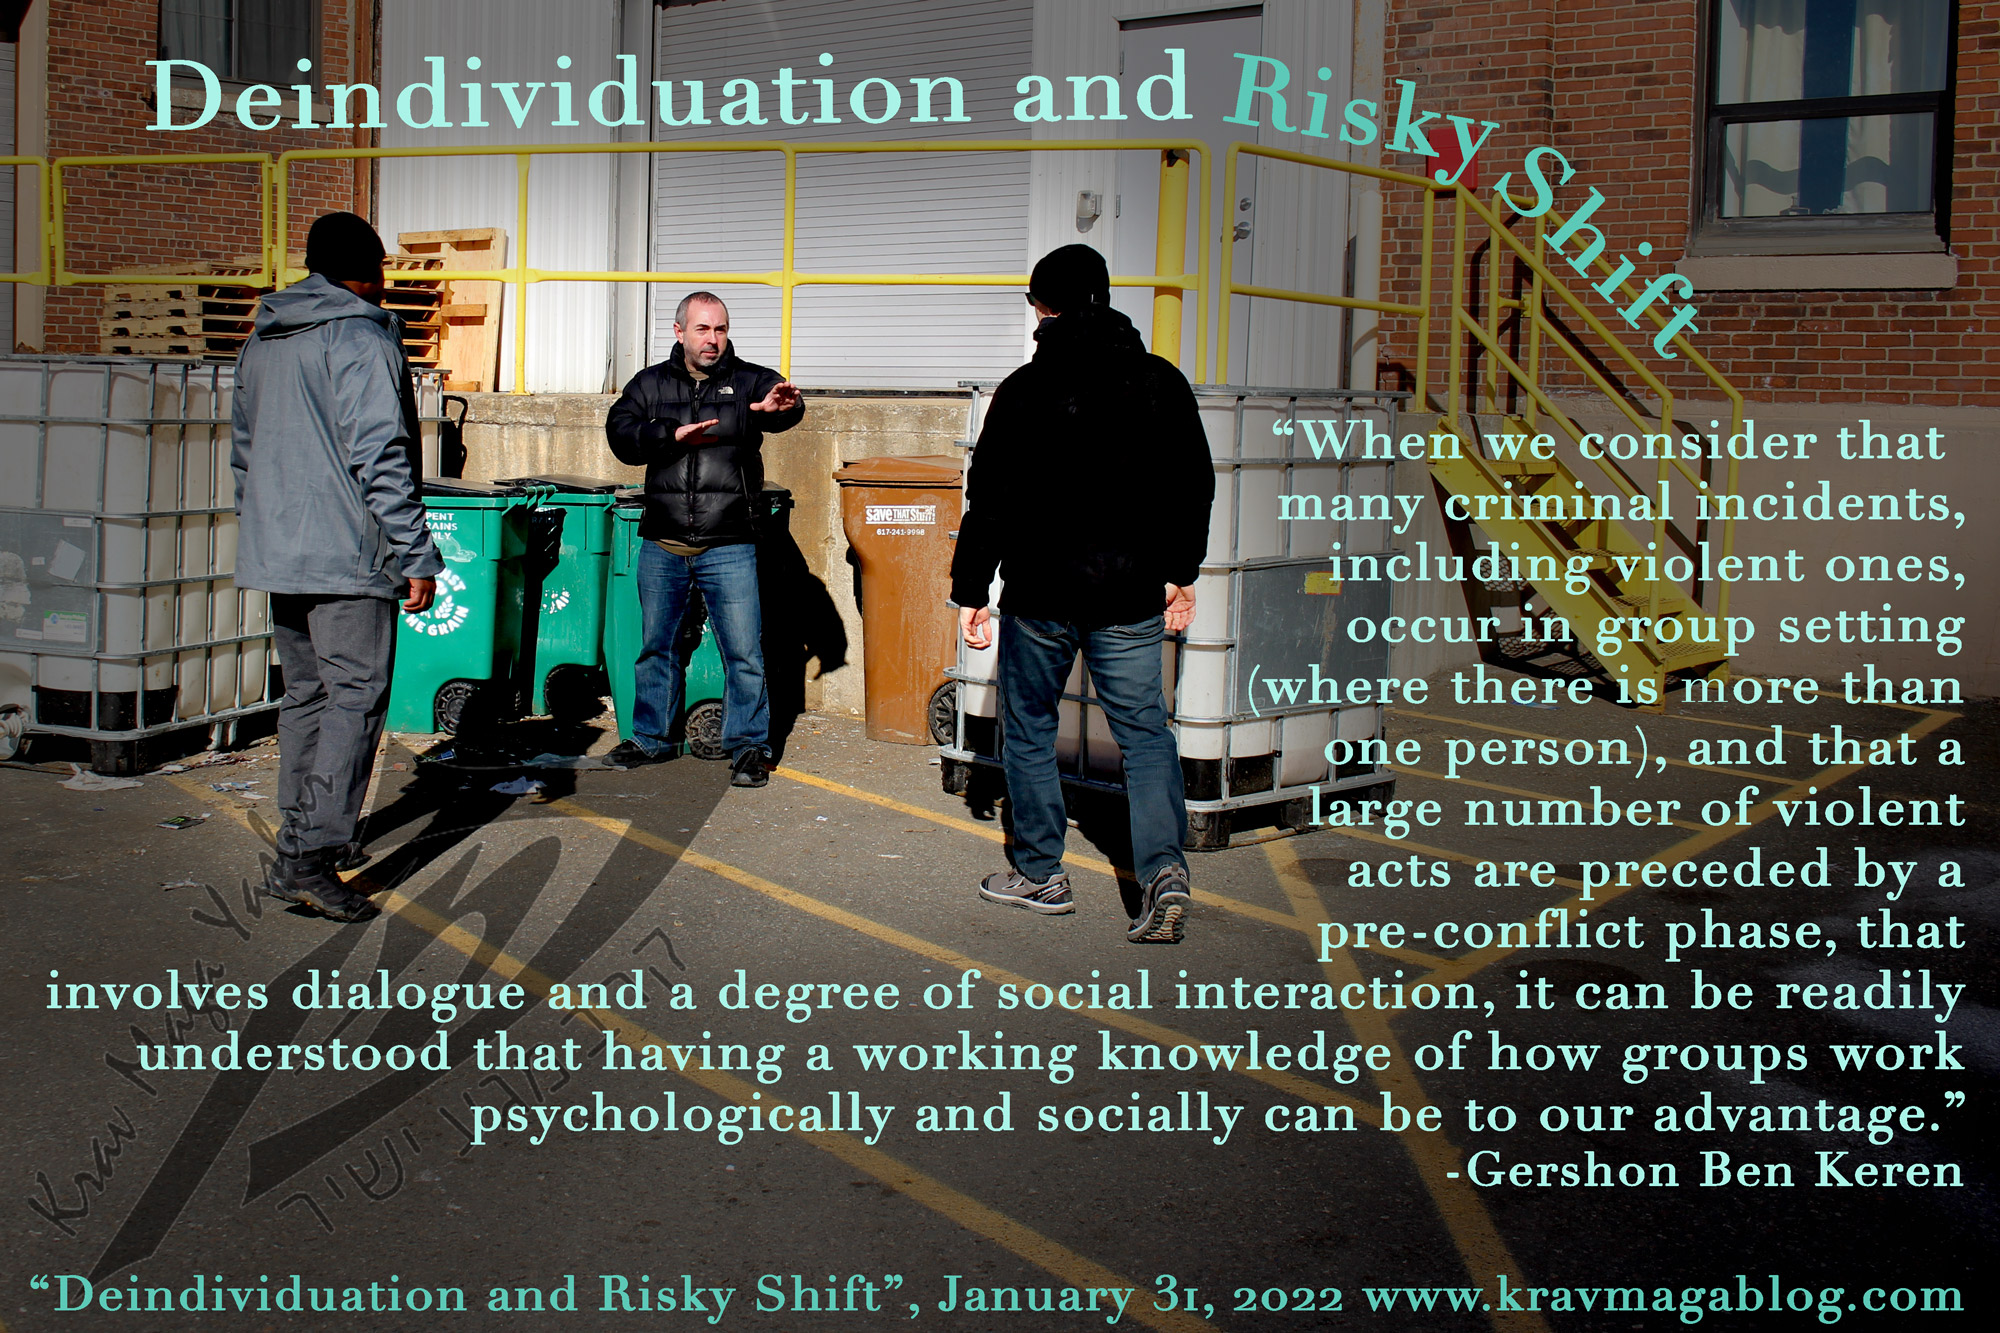 Deindividuation and Risky Shift